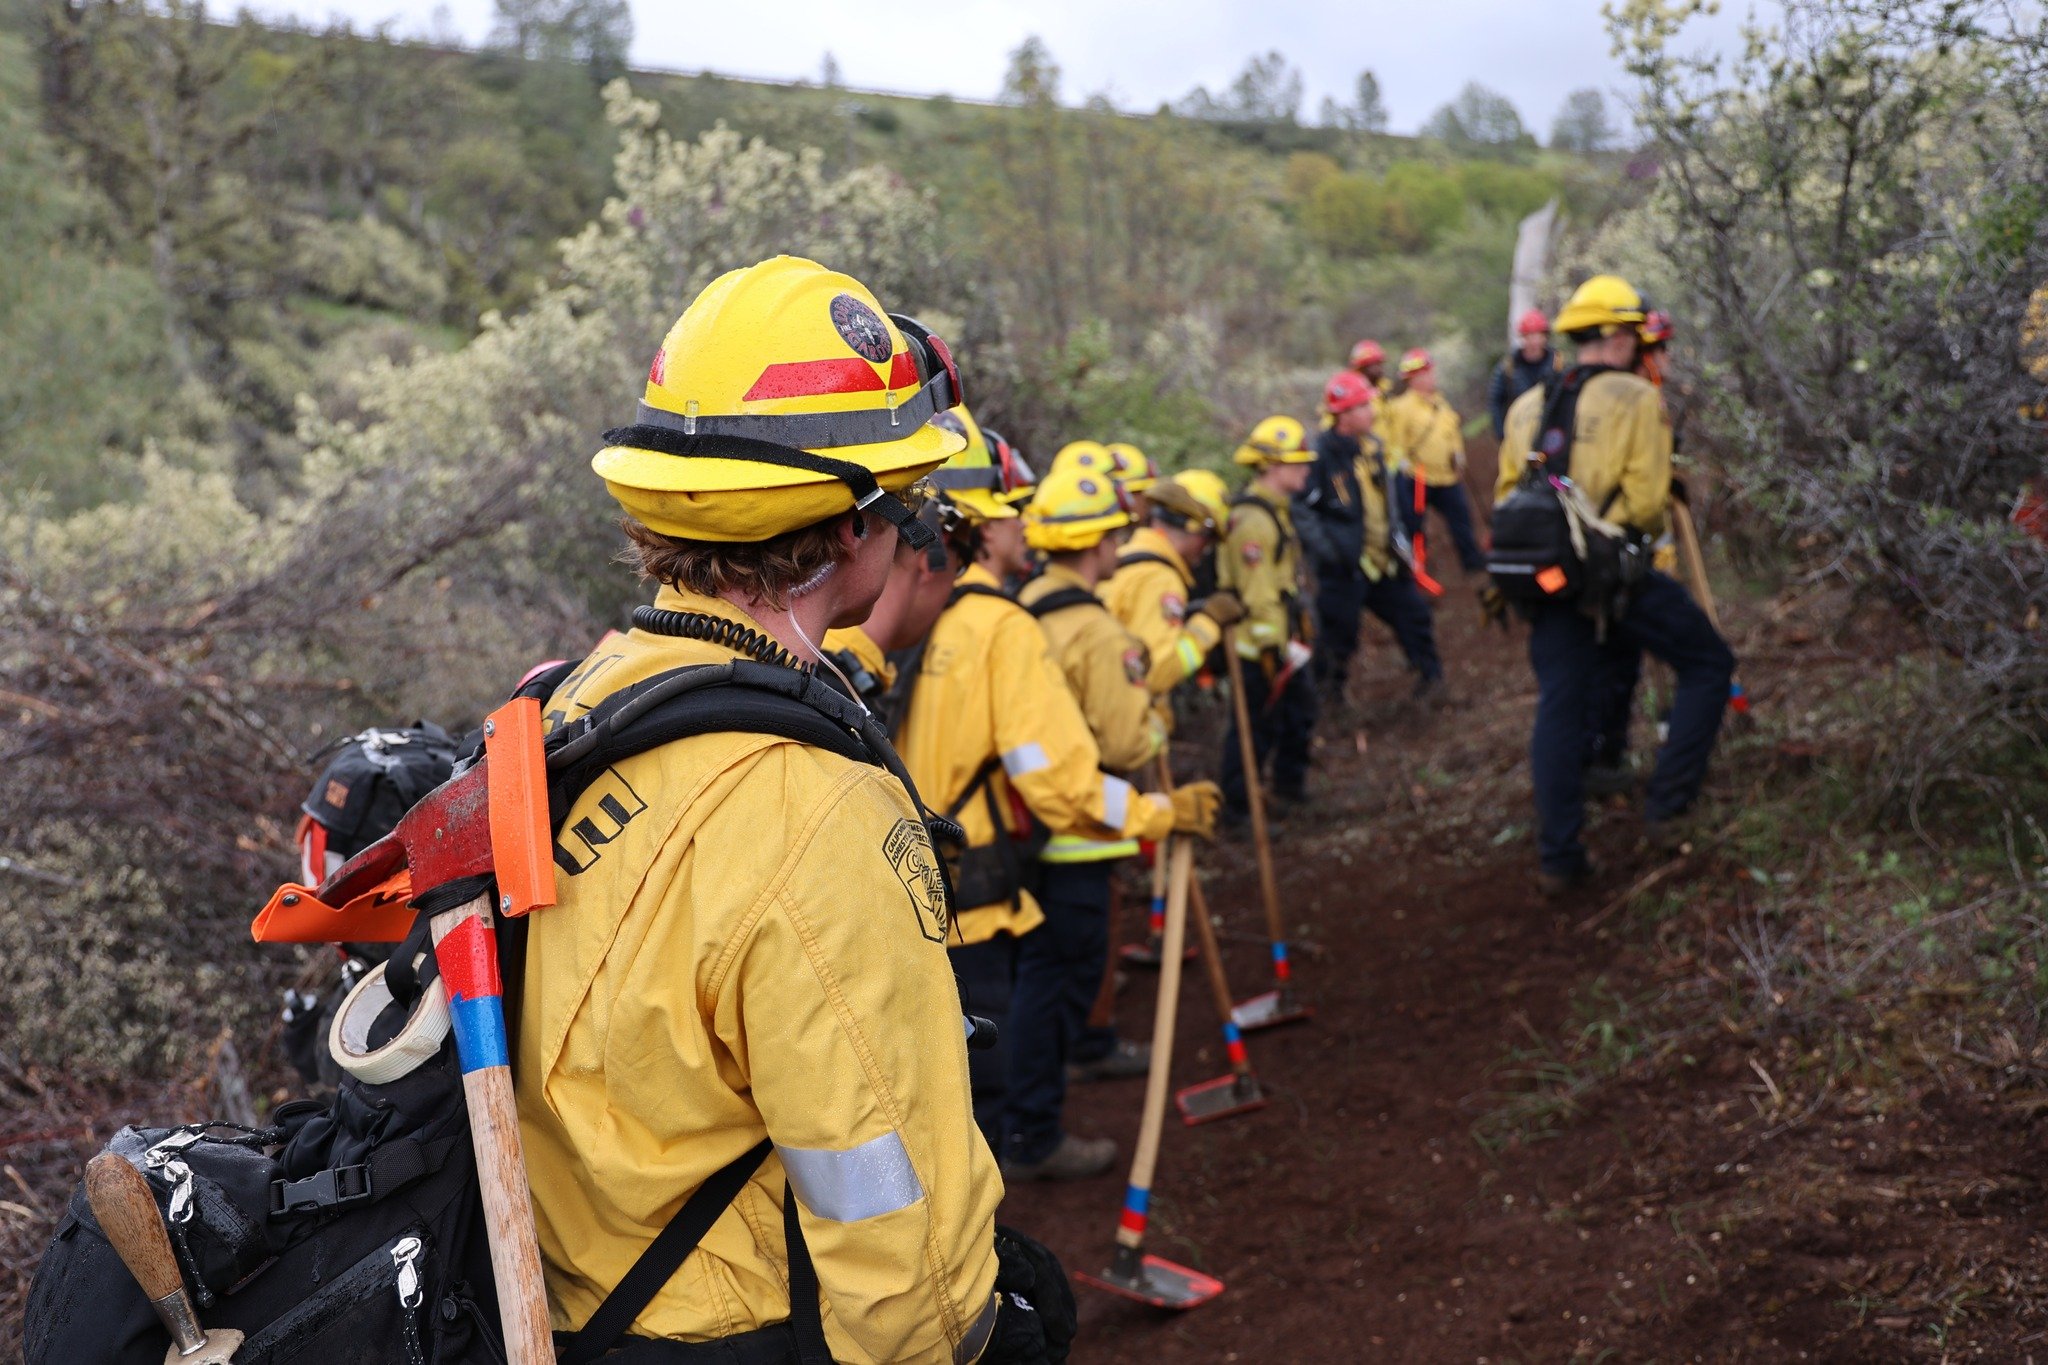 Strength, resilience, and focus. 💪

This is what it means to be a wildland firefighter on the line.

Let's celebrate their dedication and commitment to protecting our communities.

#WildfireResponse
#FirefighterLife
#CrewBossPPE